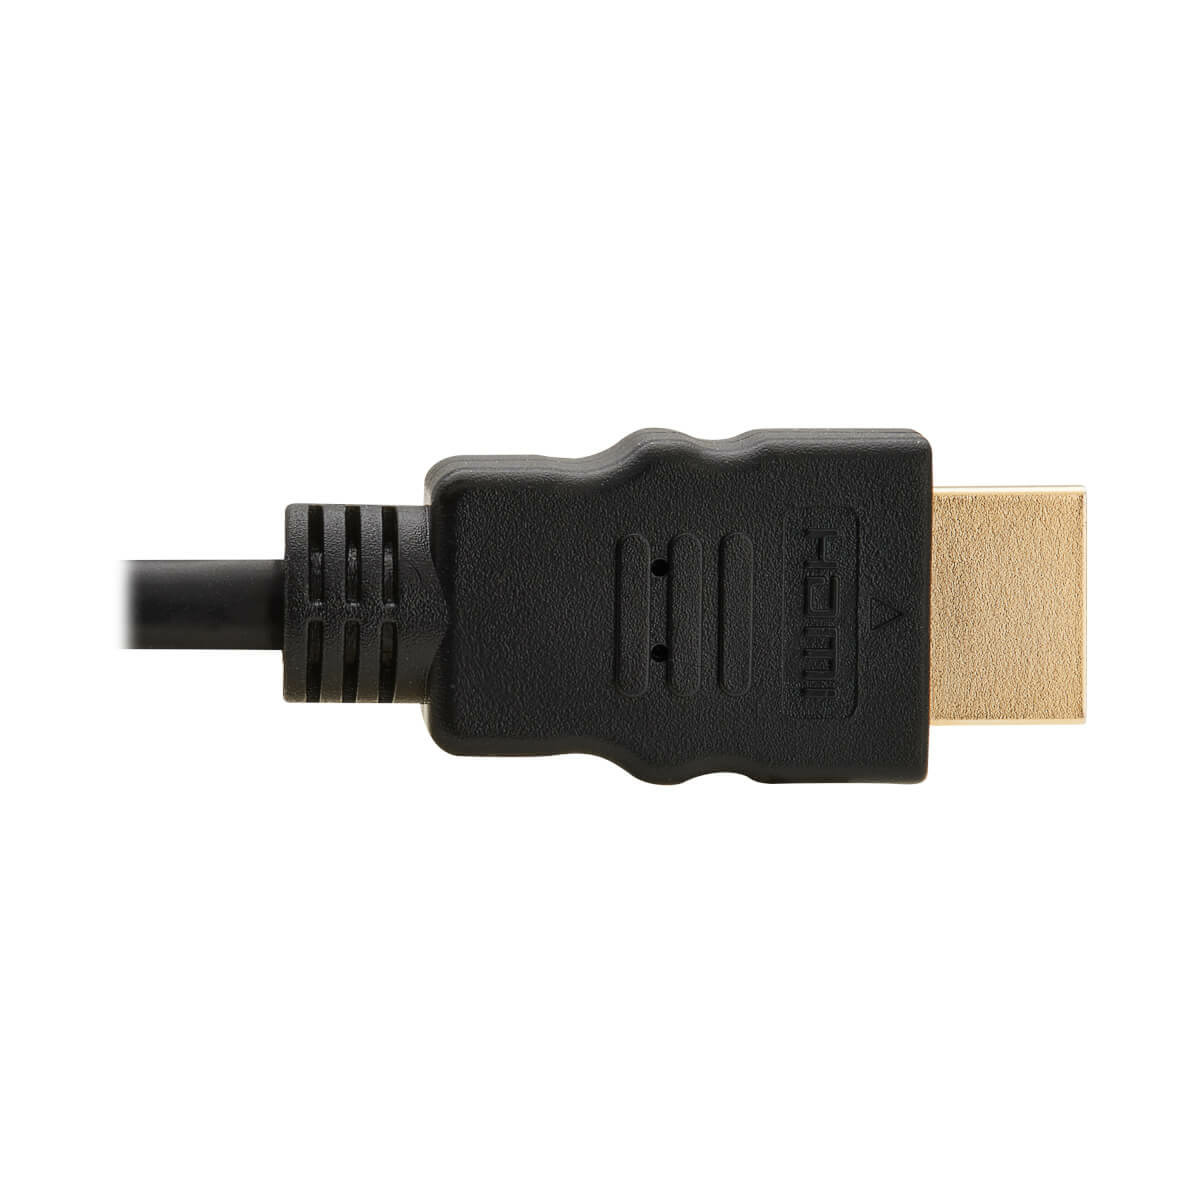 HDMI Gold Digital Video Cable